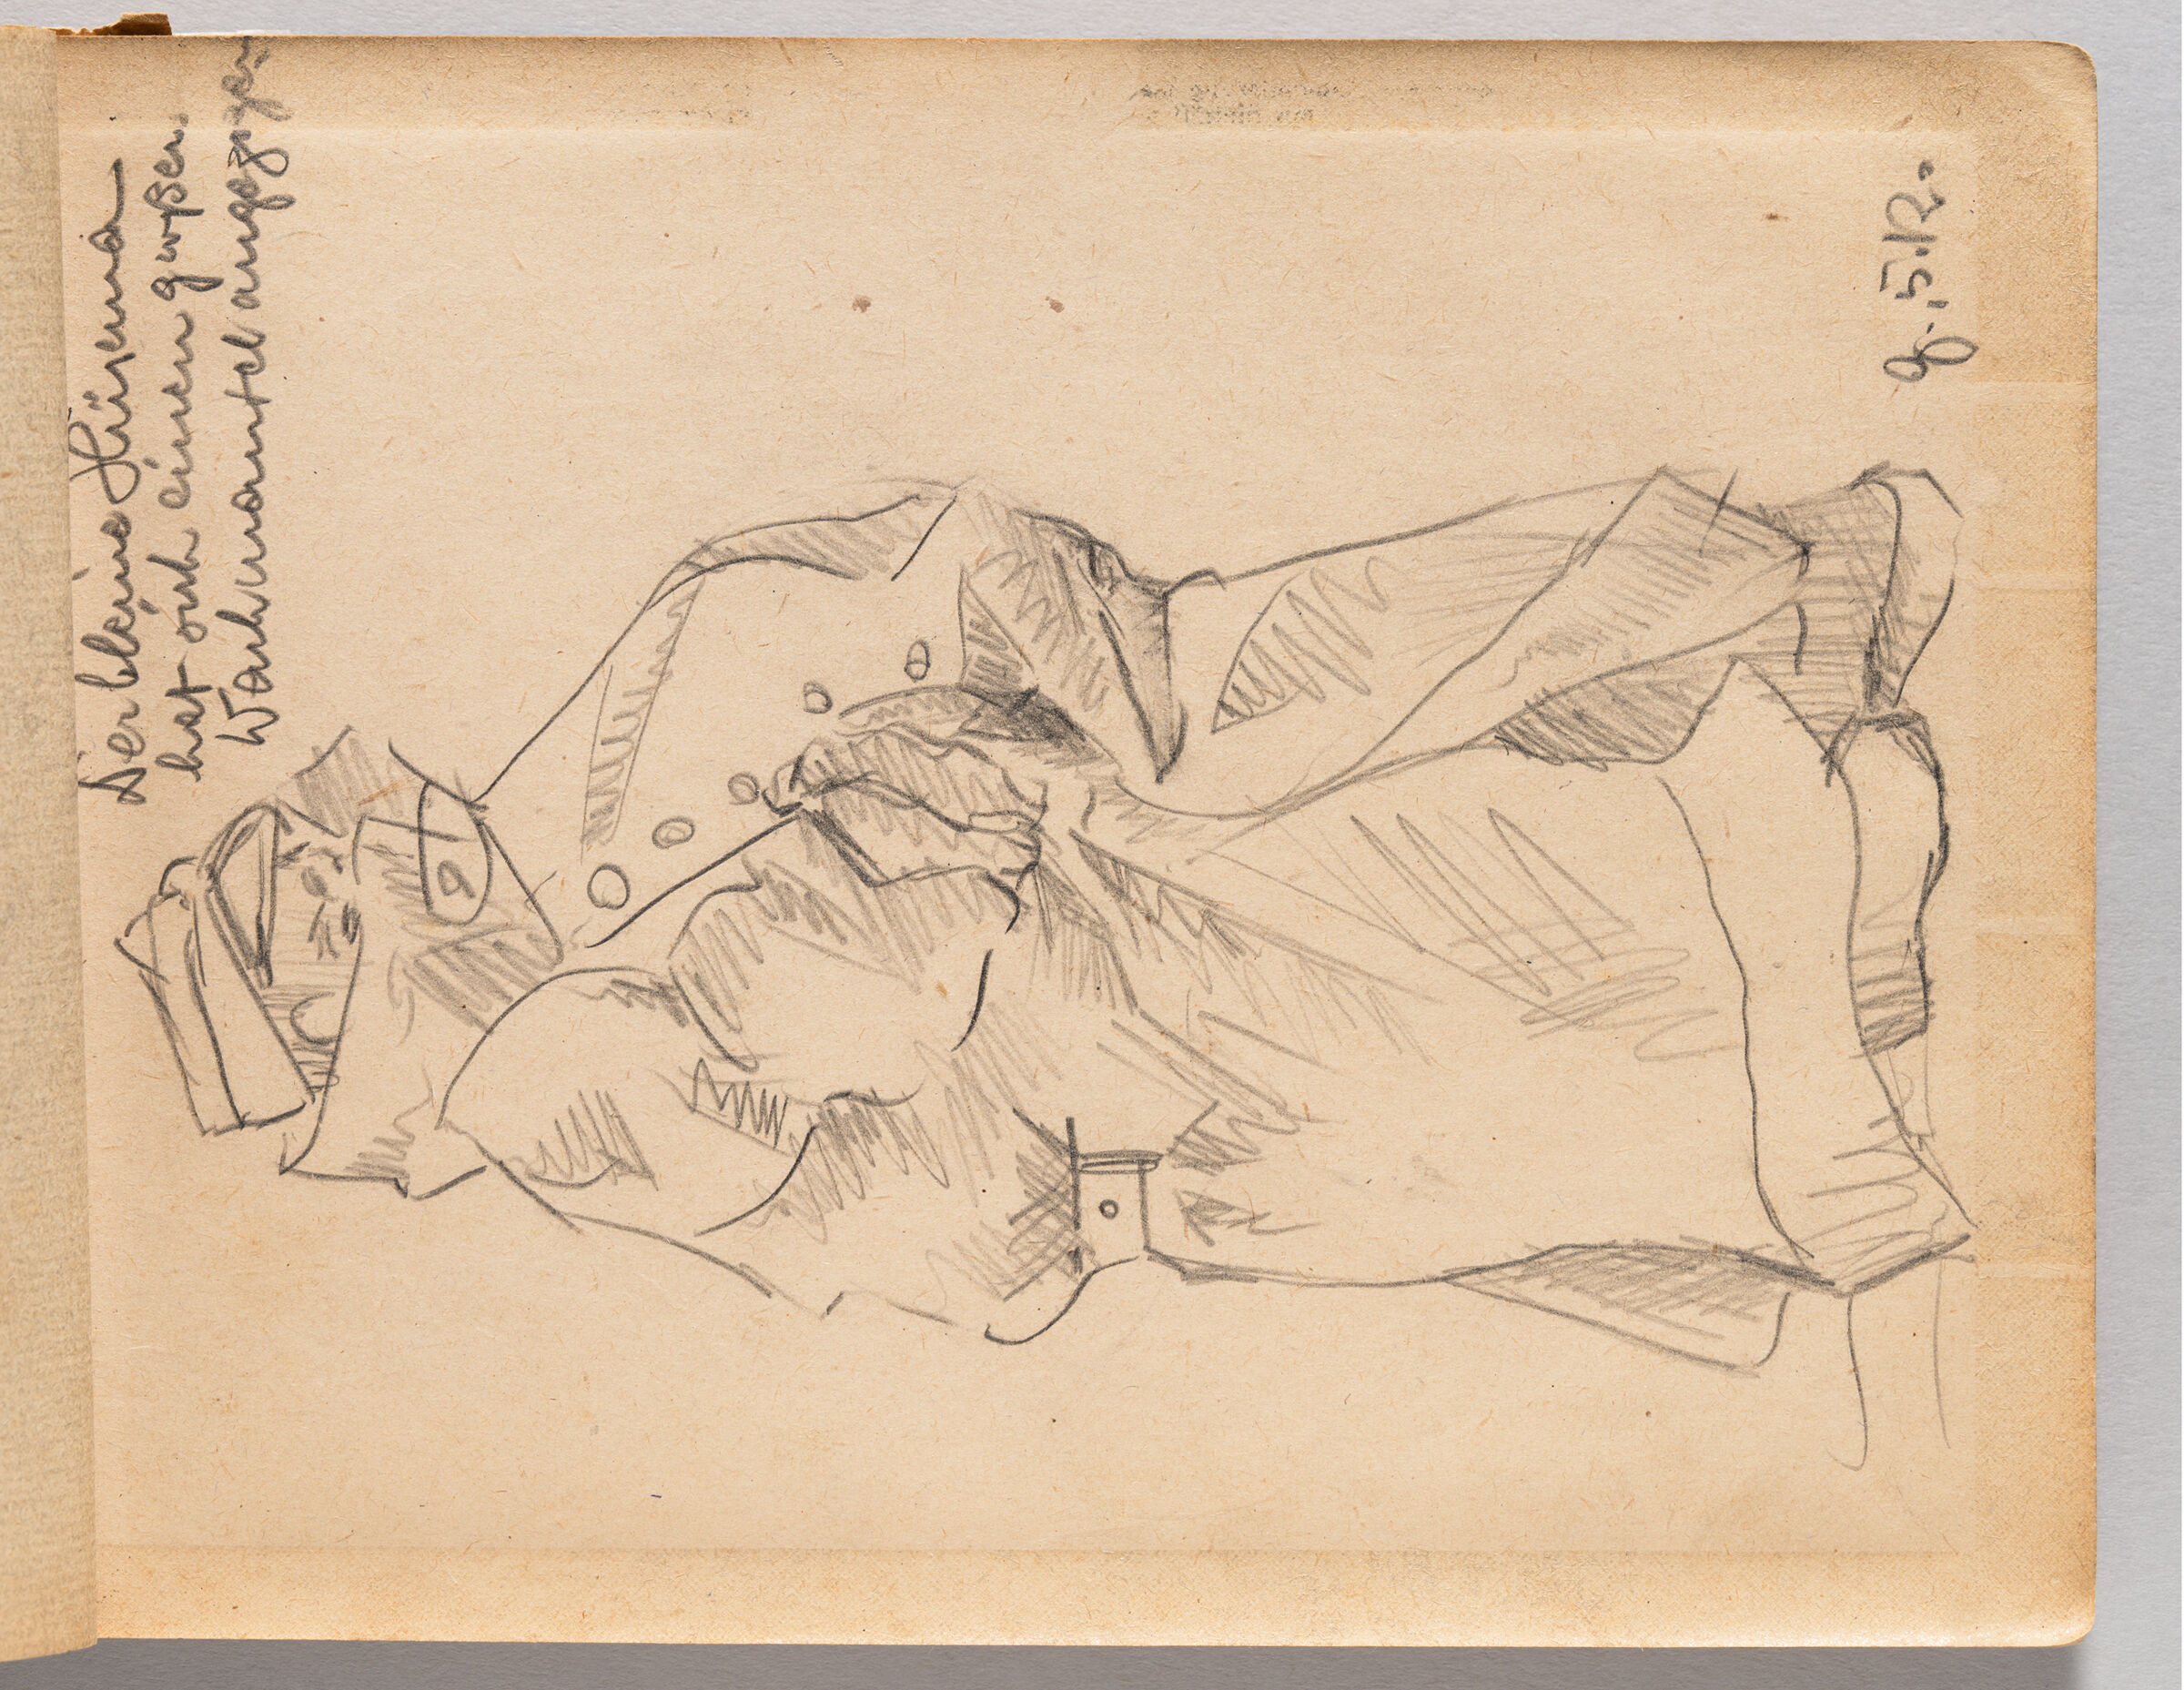 Untitled (Blank With Graphite Transfer, Left Page); Untitled (Boy Wearing Oversized Soldier's Coat, Right Page)